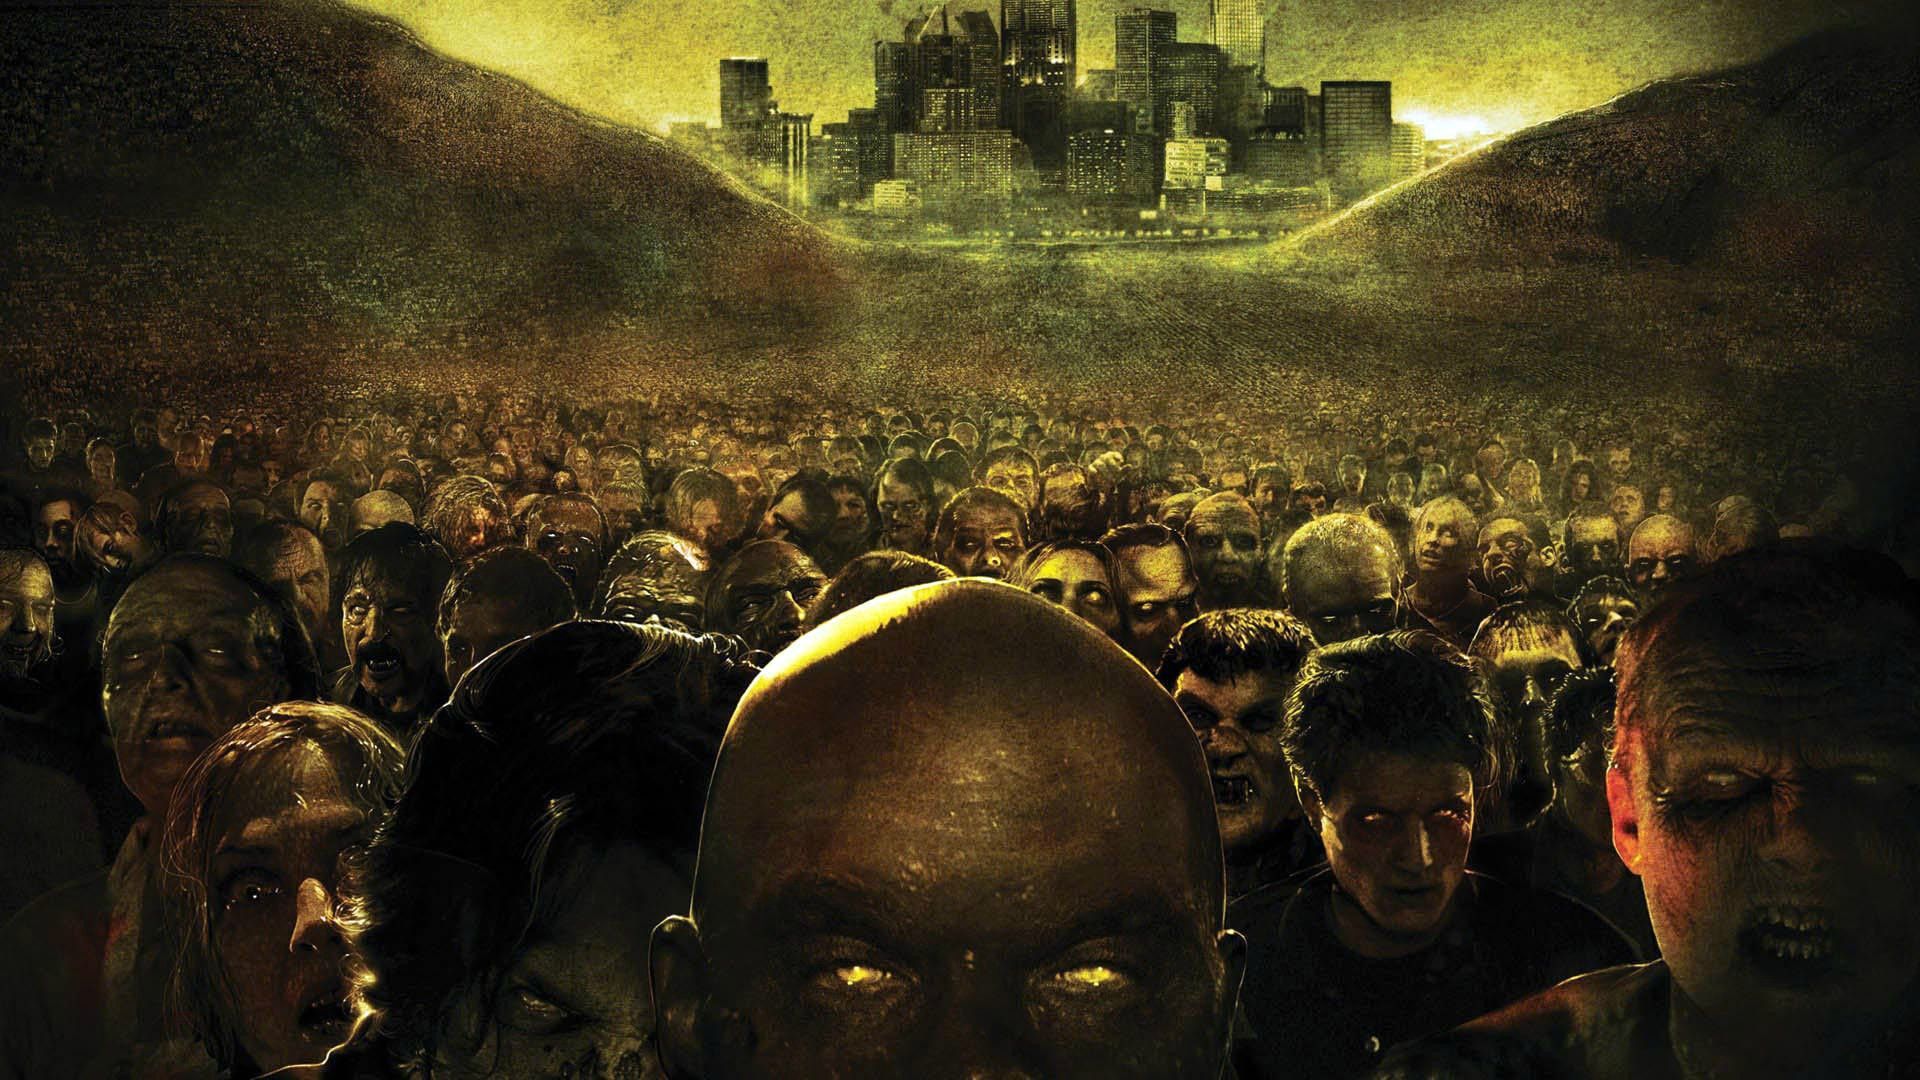 501 Zombie HD Wallpapers | Backgrounds - Wallpaper Abyss - Page 3